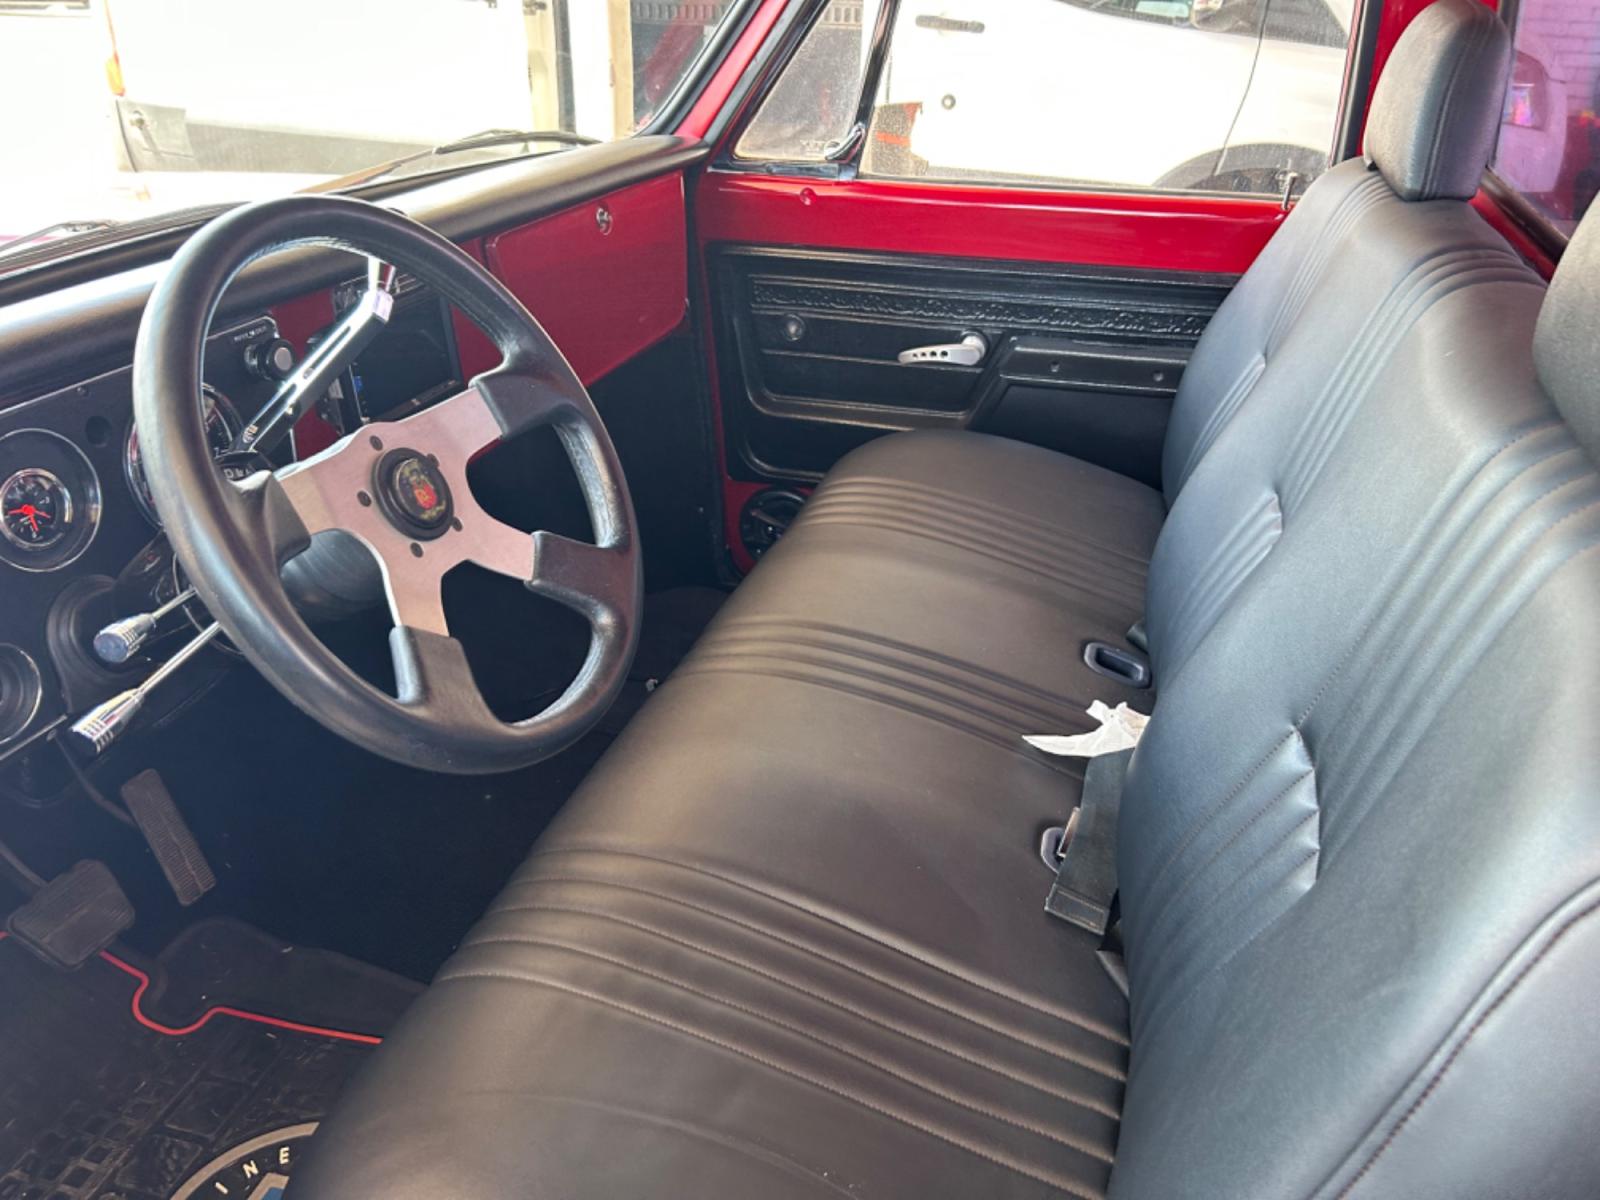 1972 Red Chevrolet C10 (CCE142A1201) , located at 1687 Business 35 S, New Braunfels, TX, 78130, (830) 625-7159, 29.655487, -98.051491 - Photo #10